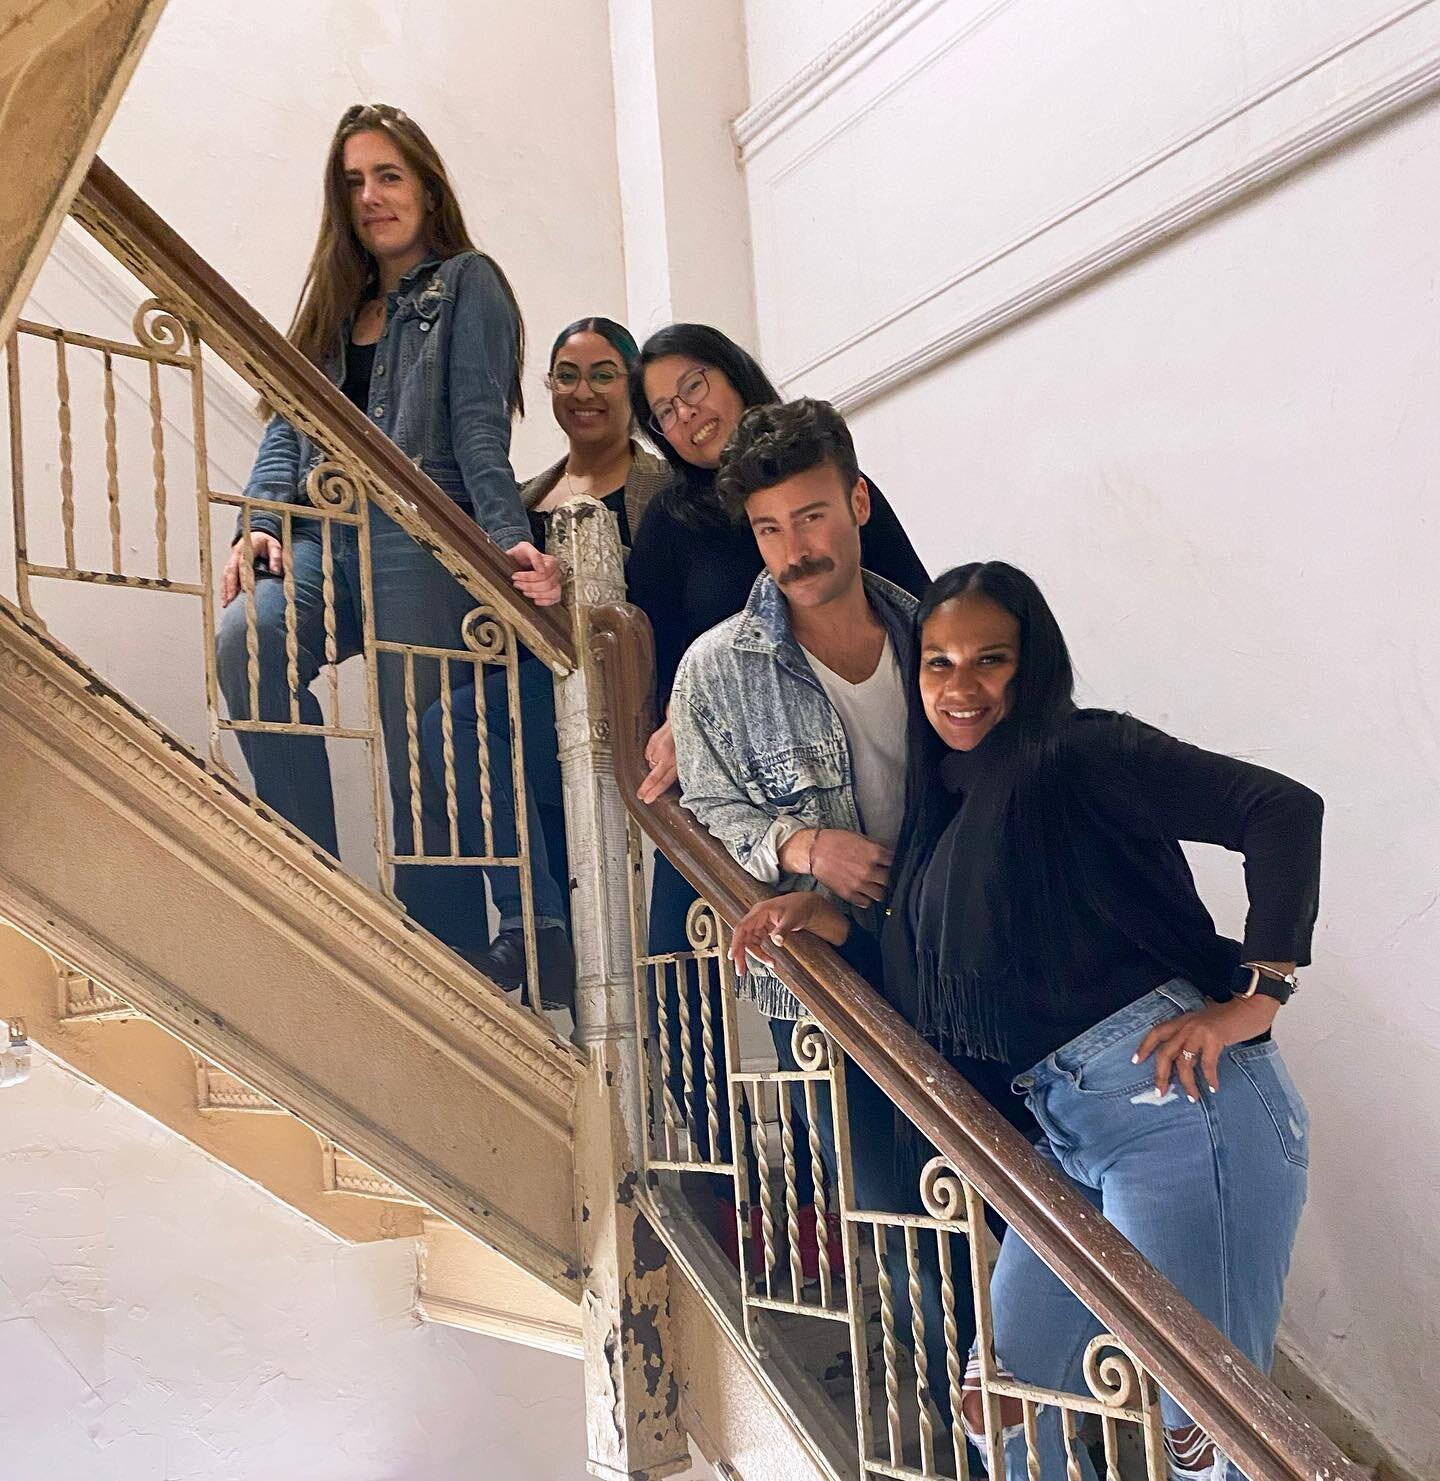 CVTC staff rolled out (and cuffed) our boldest blues in support for survivors on #DenimDay2023. Rocking your jeans with us? Tag @cvtcnyc in your #DenimDay photos! 👖 🌱 
.
.
.
#takespacemakespace #saam